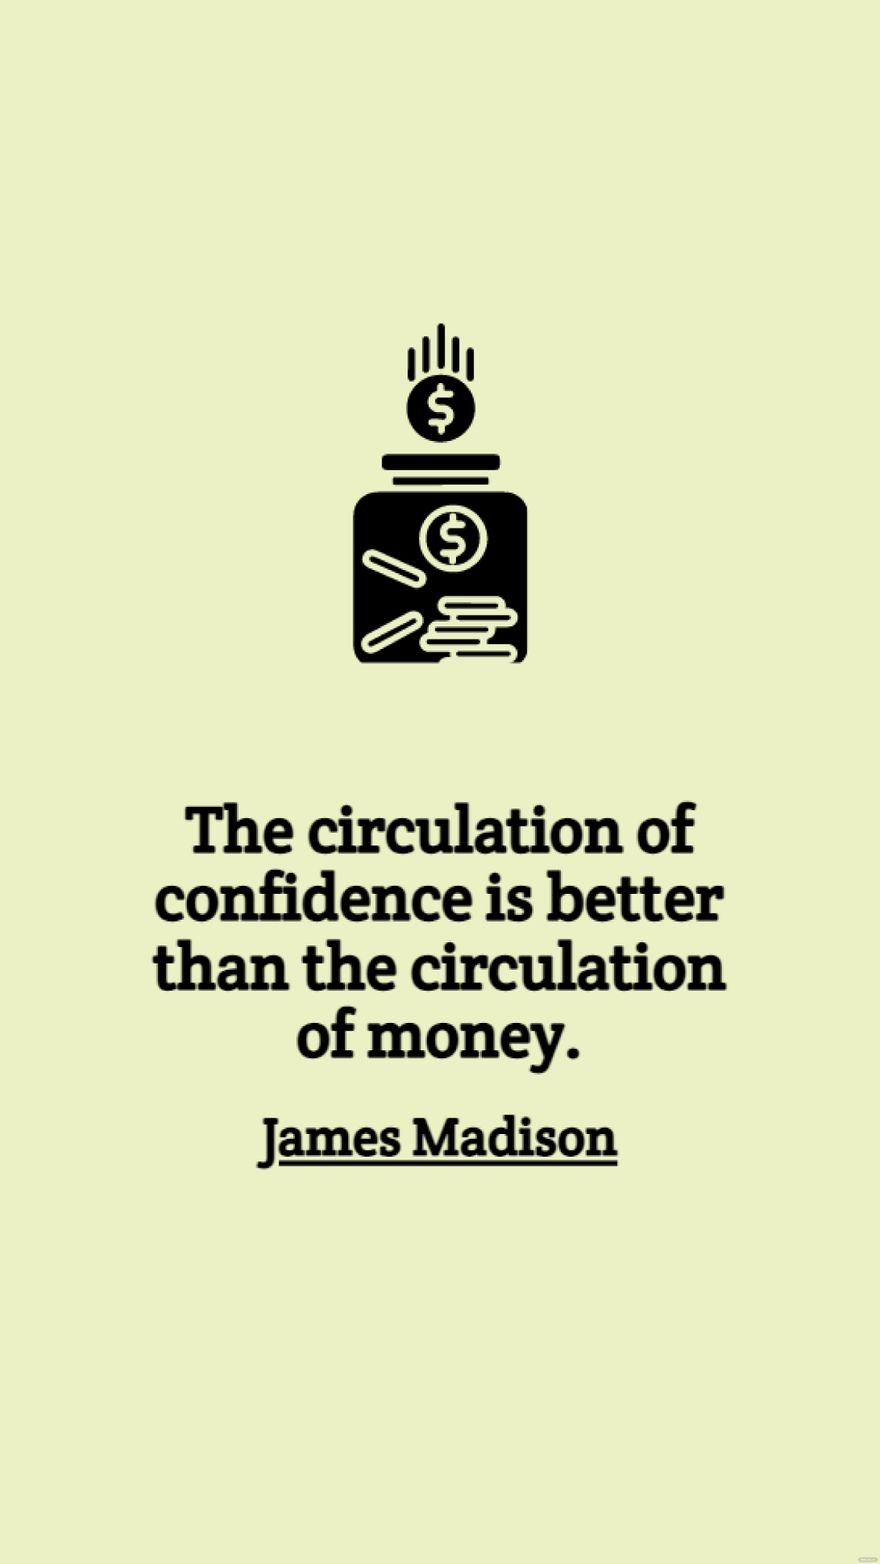 James Madison - The circulation of confidence is better than the circulation of money.